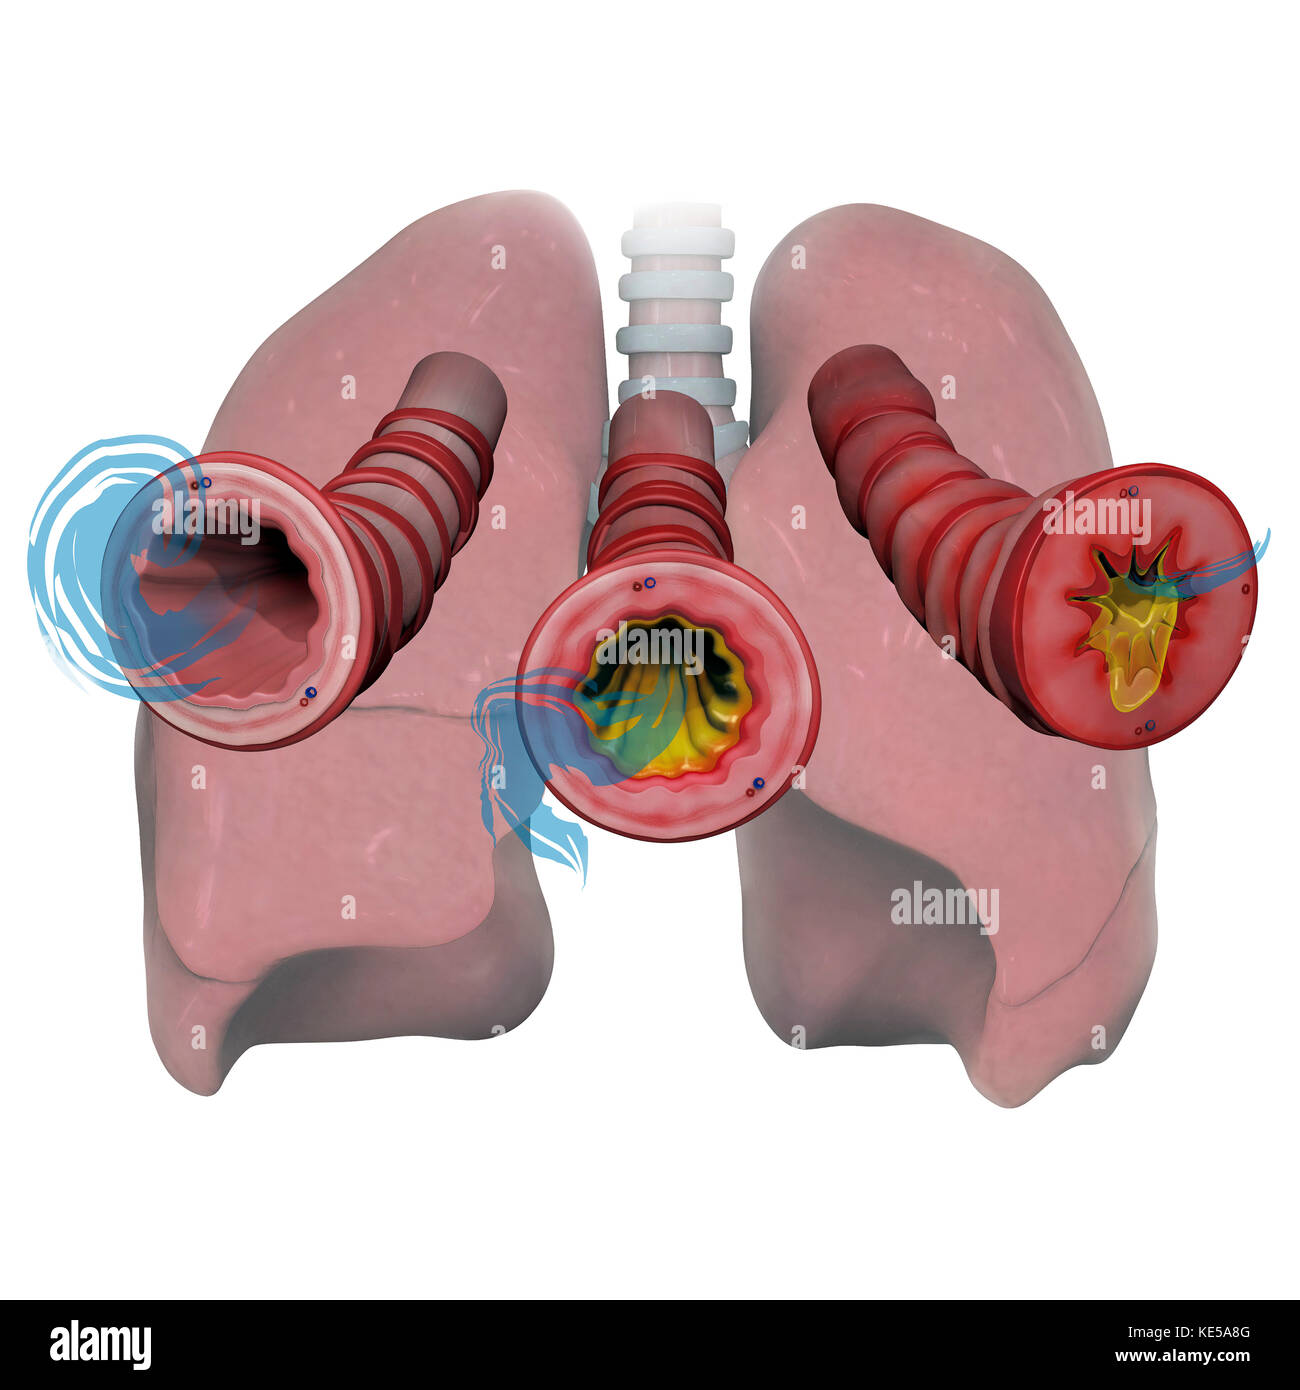 Lungs and bronchioles depicting asthma stages of inflammation and mucus. Stock Photo